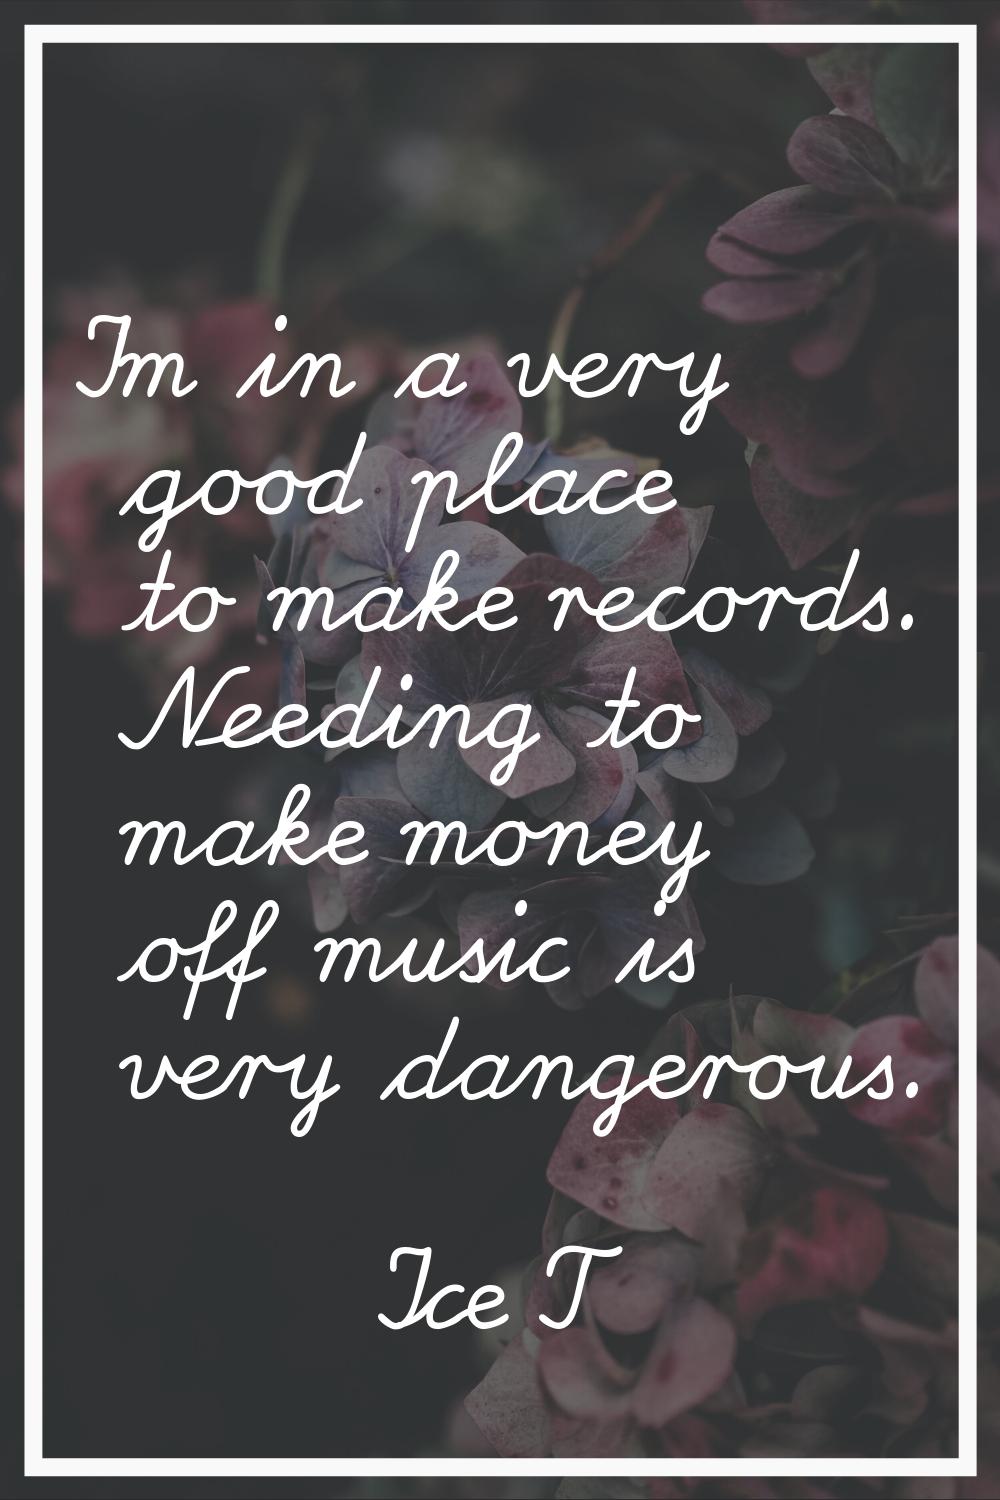 I'm in a very good place to make records. Needing to make money off music is very dangerous.